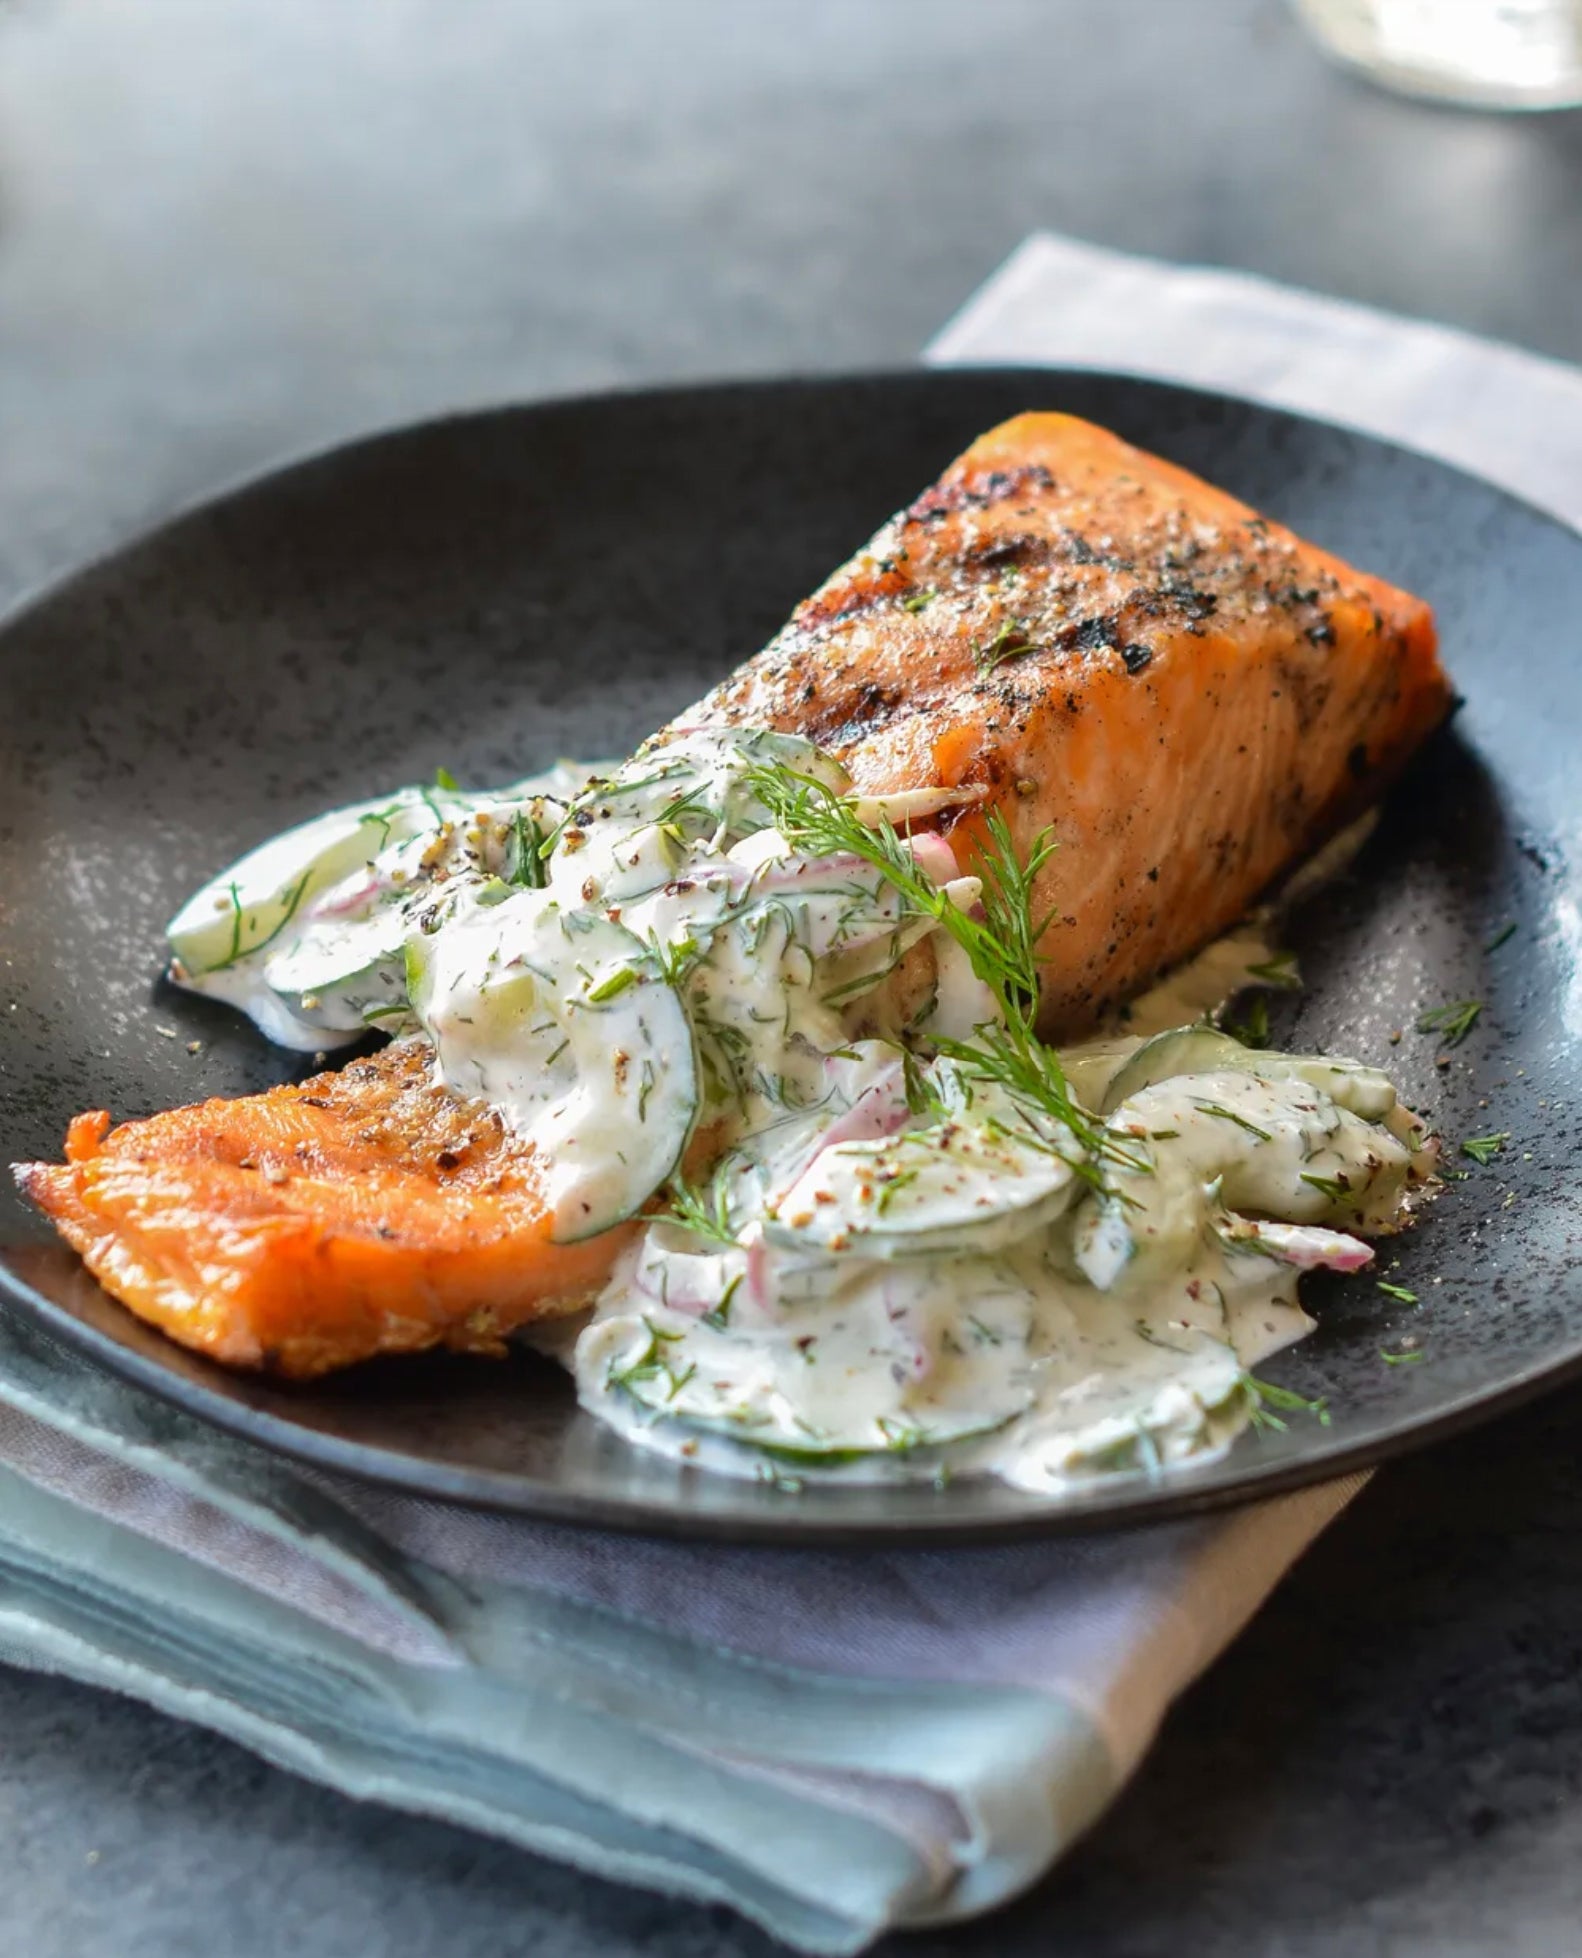 Grilled Salmon with Creamy Cucumber-Dill Salad